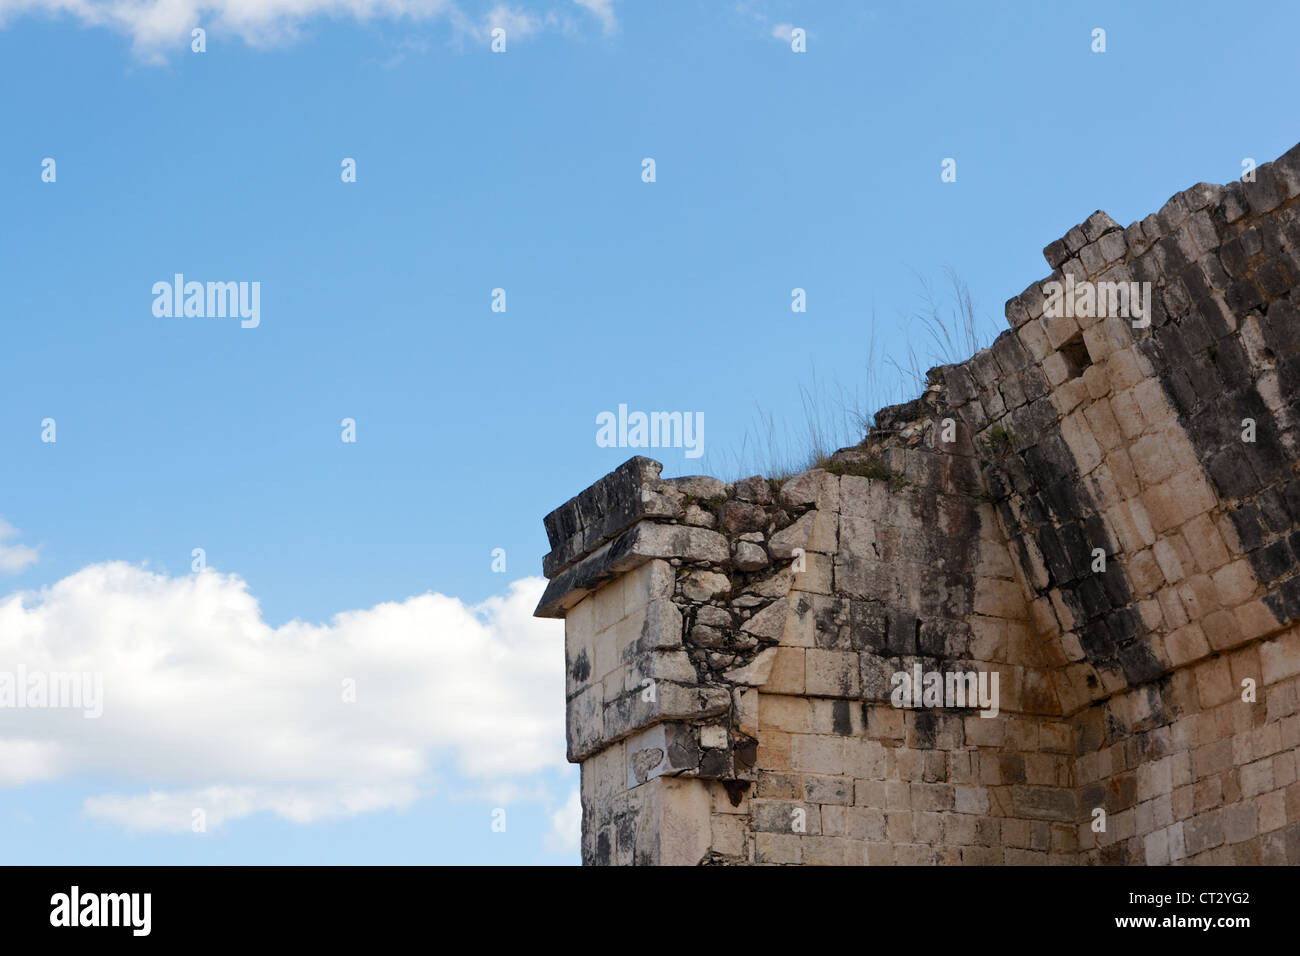 Detail of a crumbling Mayan ruin before the blue sky at Chichen Itza, Yucatan, Mexico. Stock Photo